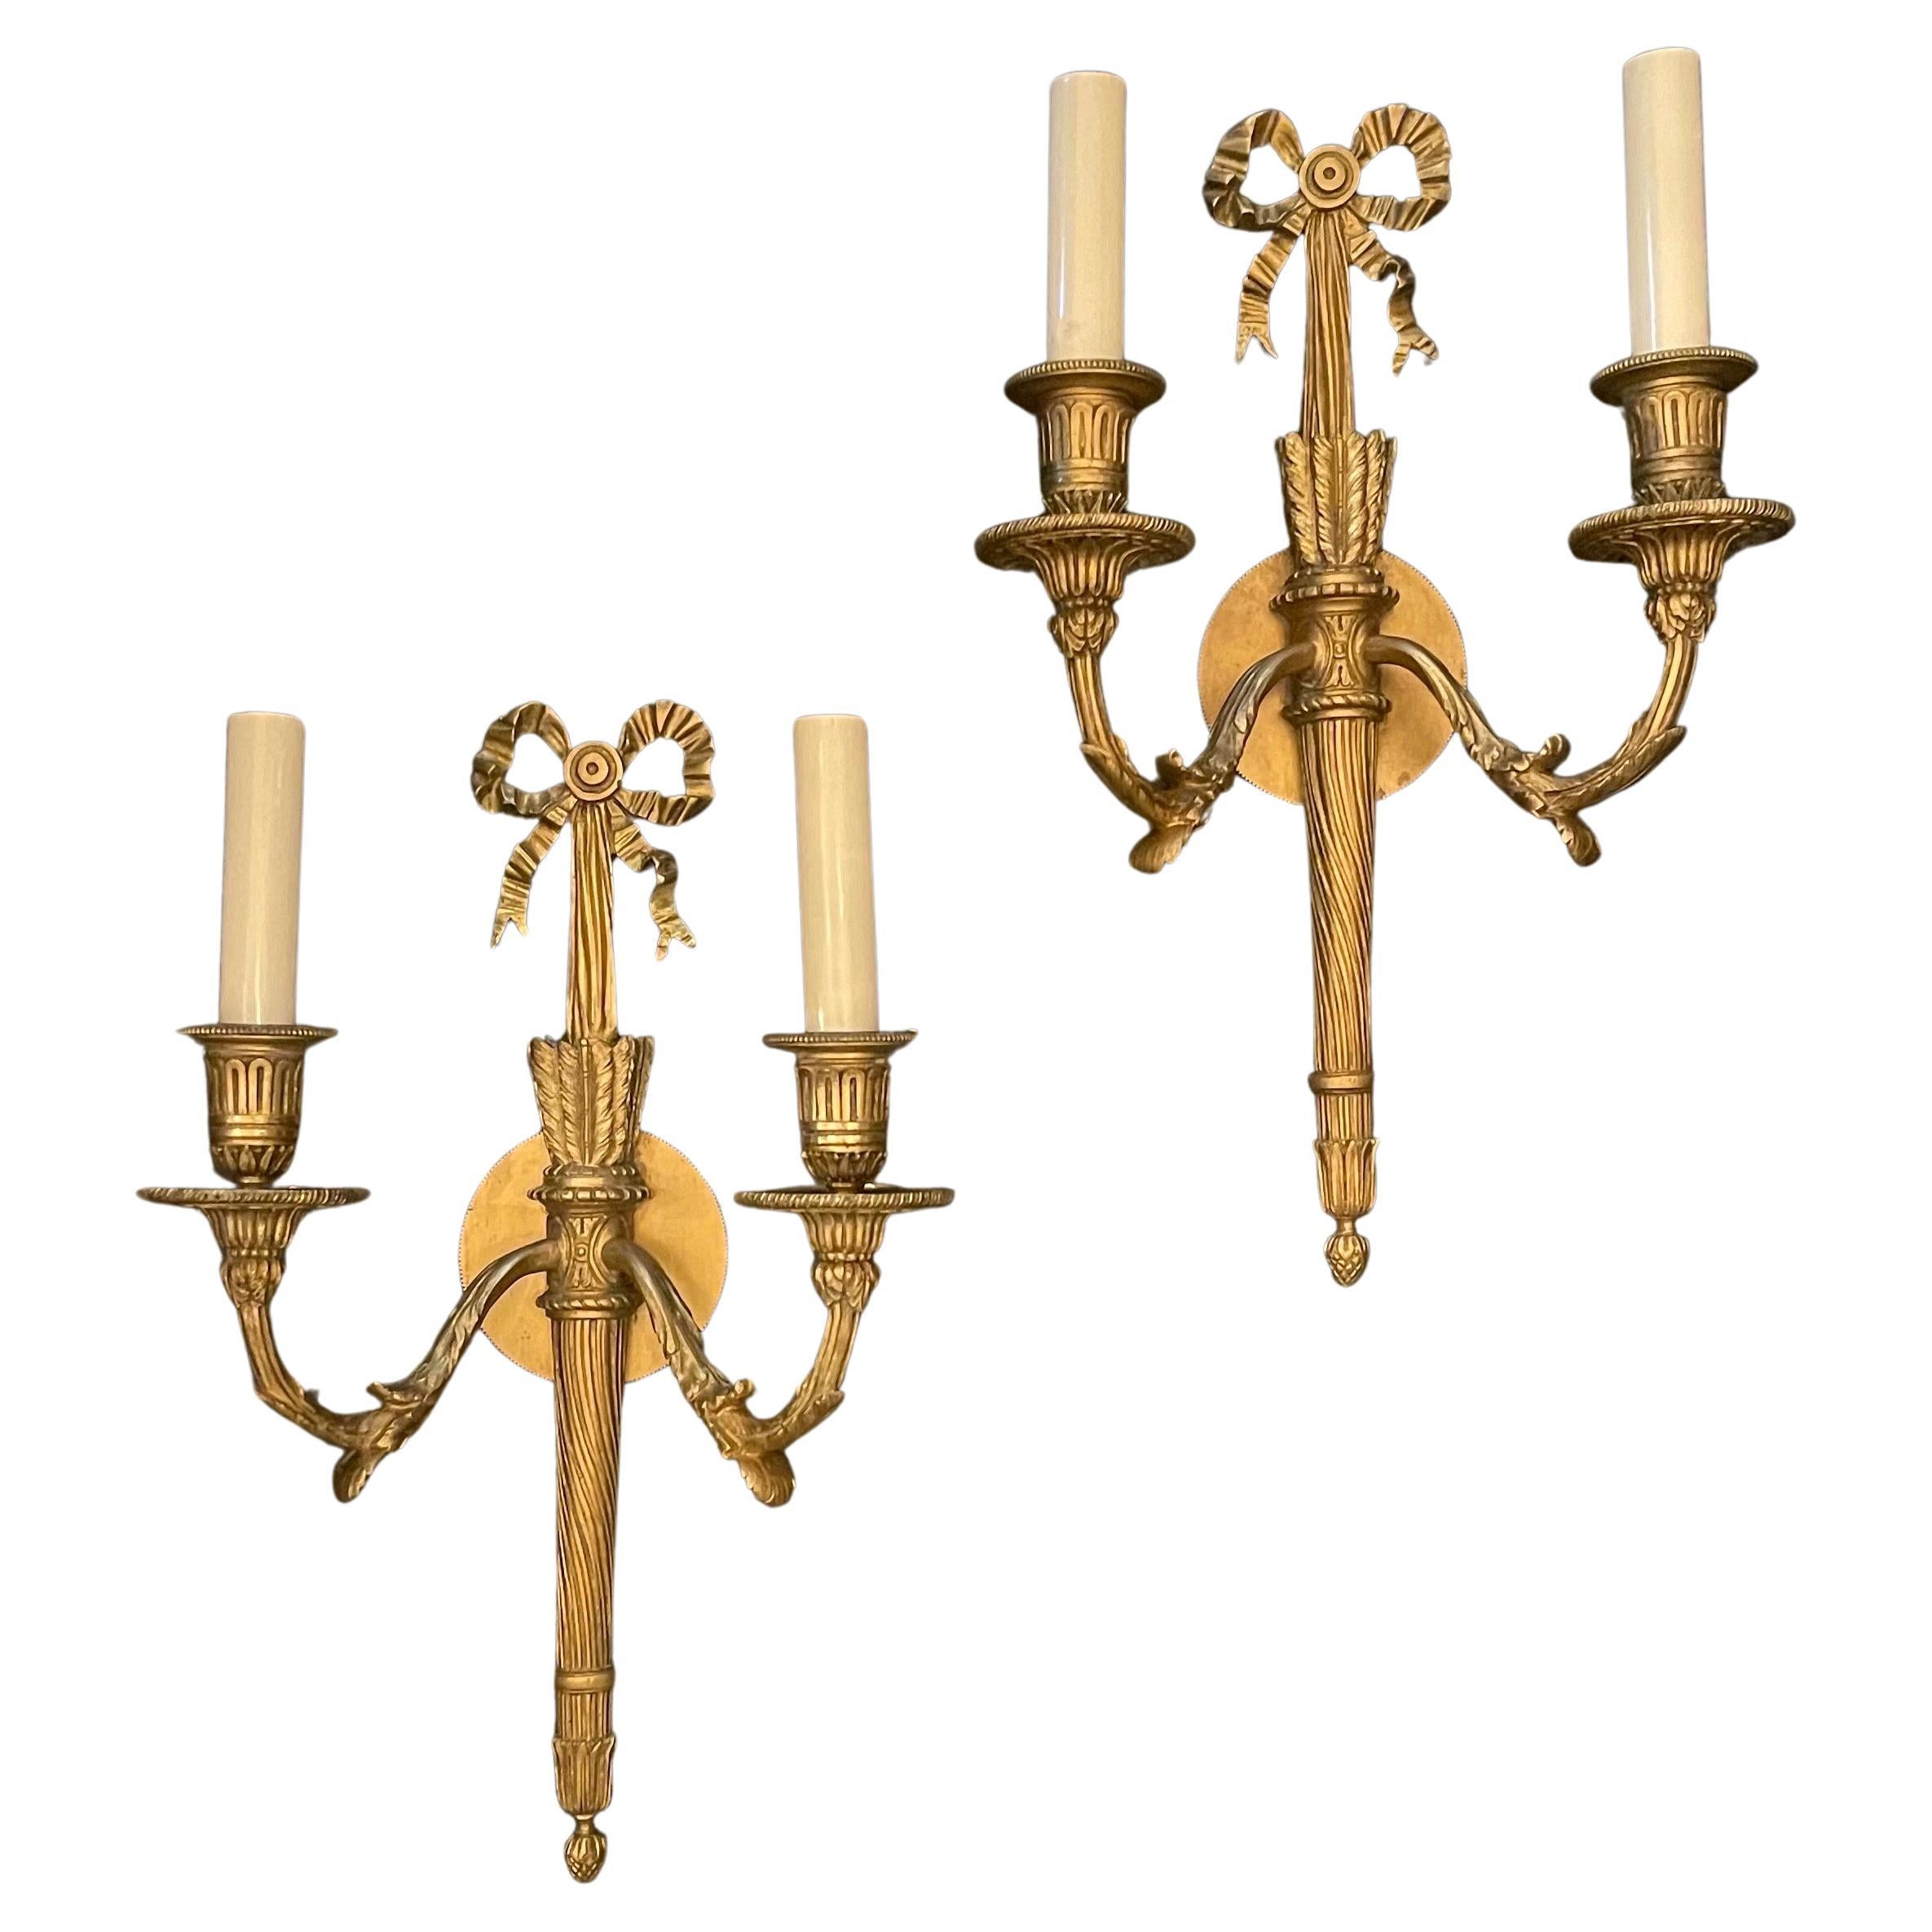 Wonderful Pair French Gilt Doré Bronze Bow Torchiere Caldwell Two-Light Sconces For Sale